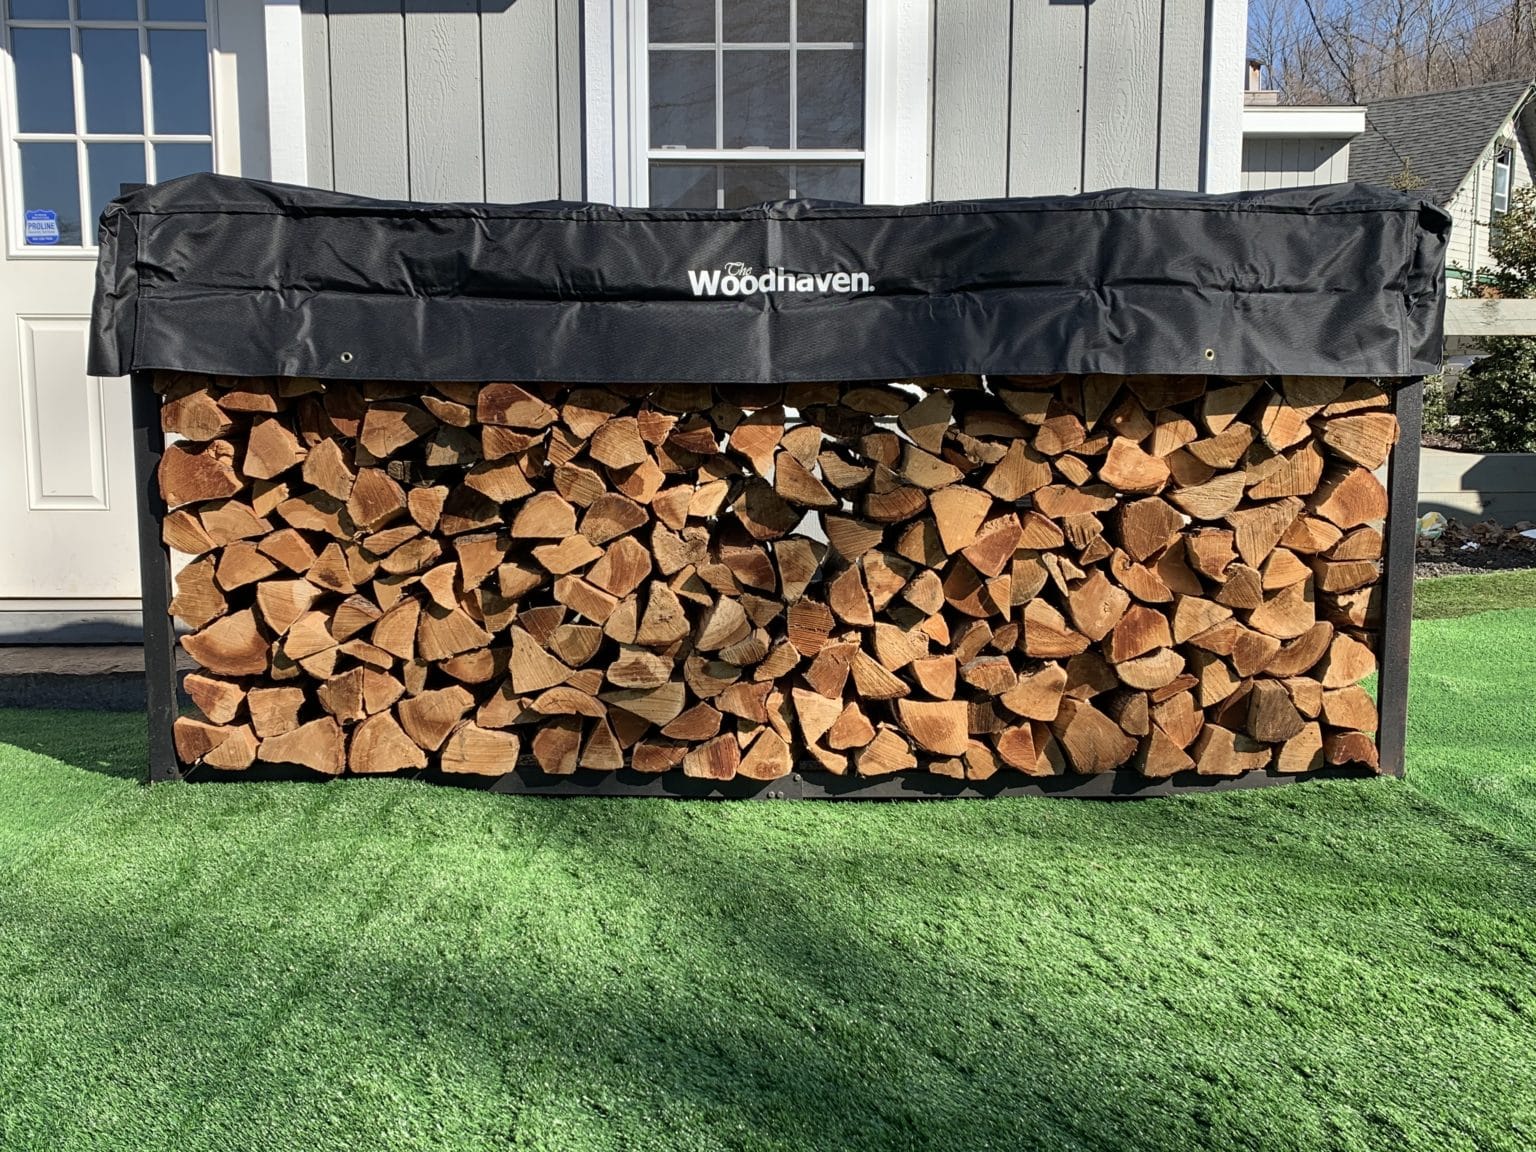 Premier Firewood Company Firewood For Sale And Delivery In Ct And Ny